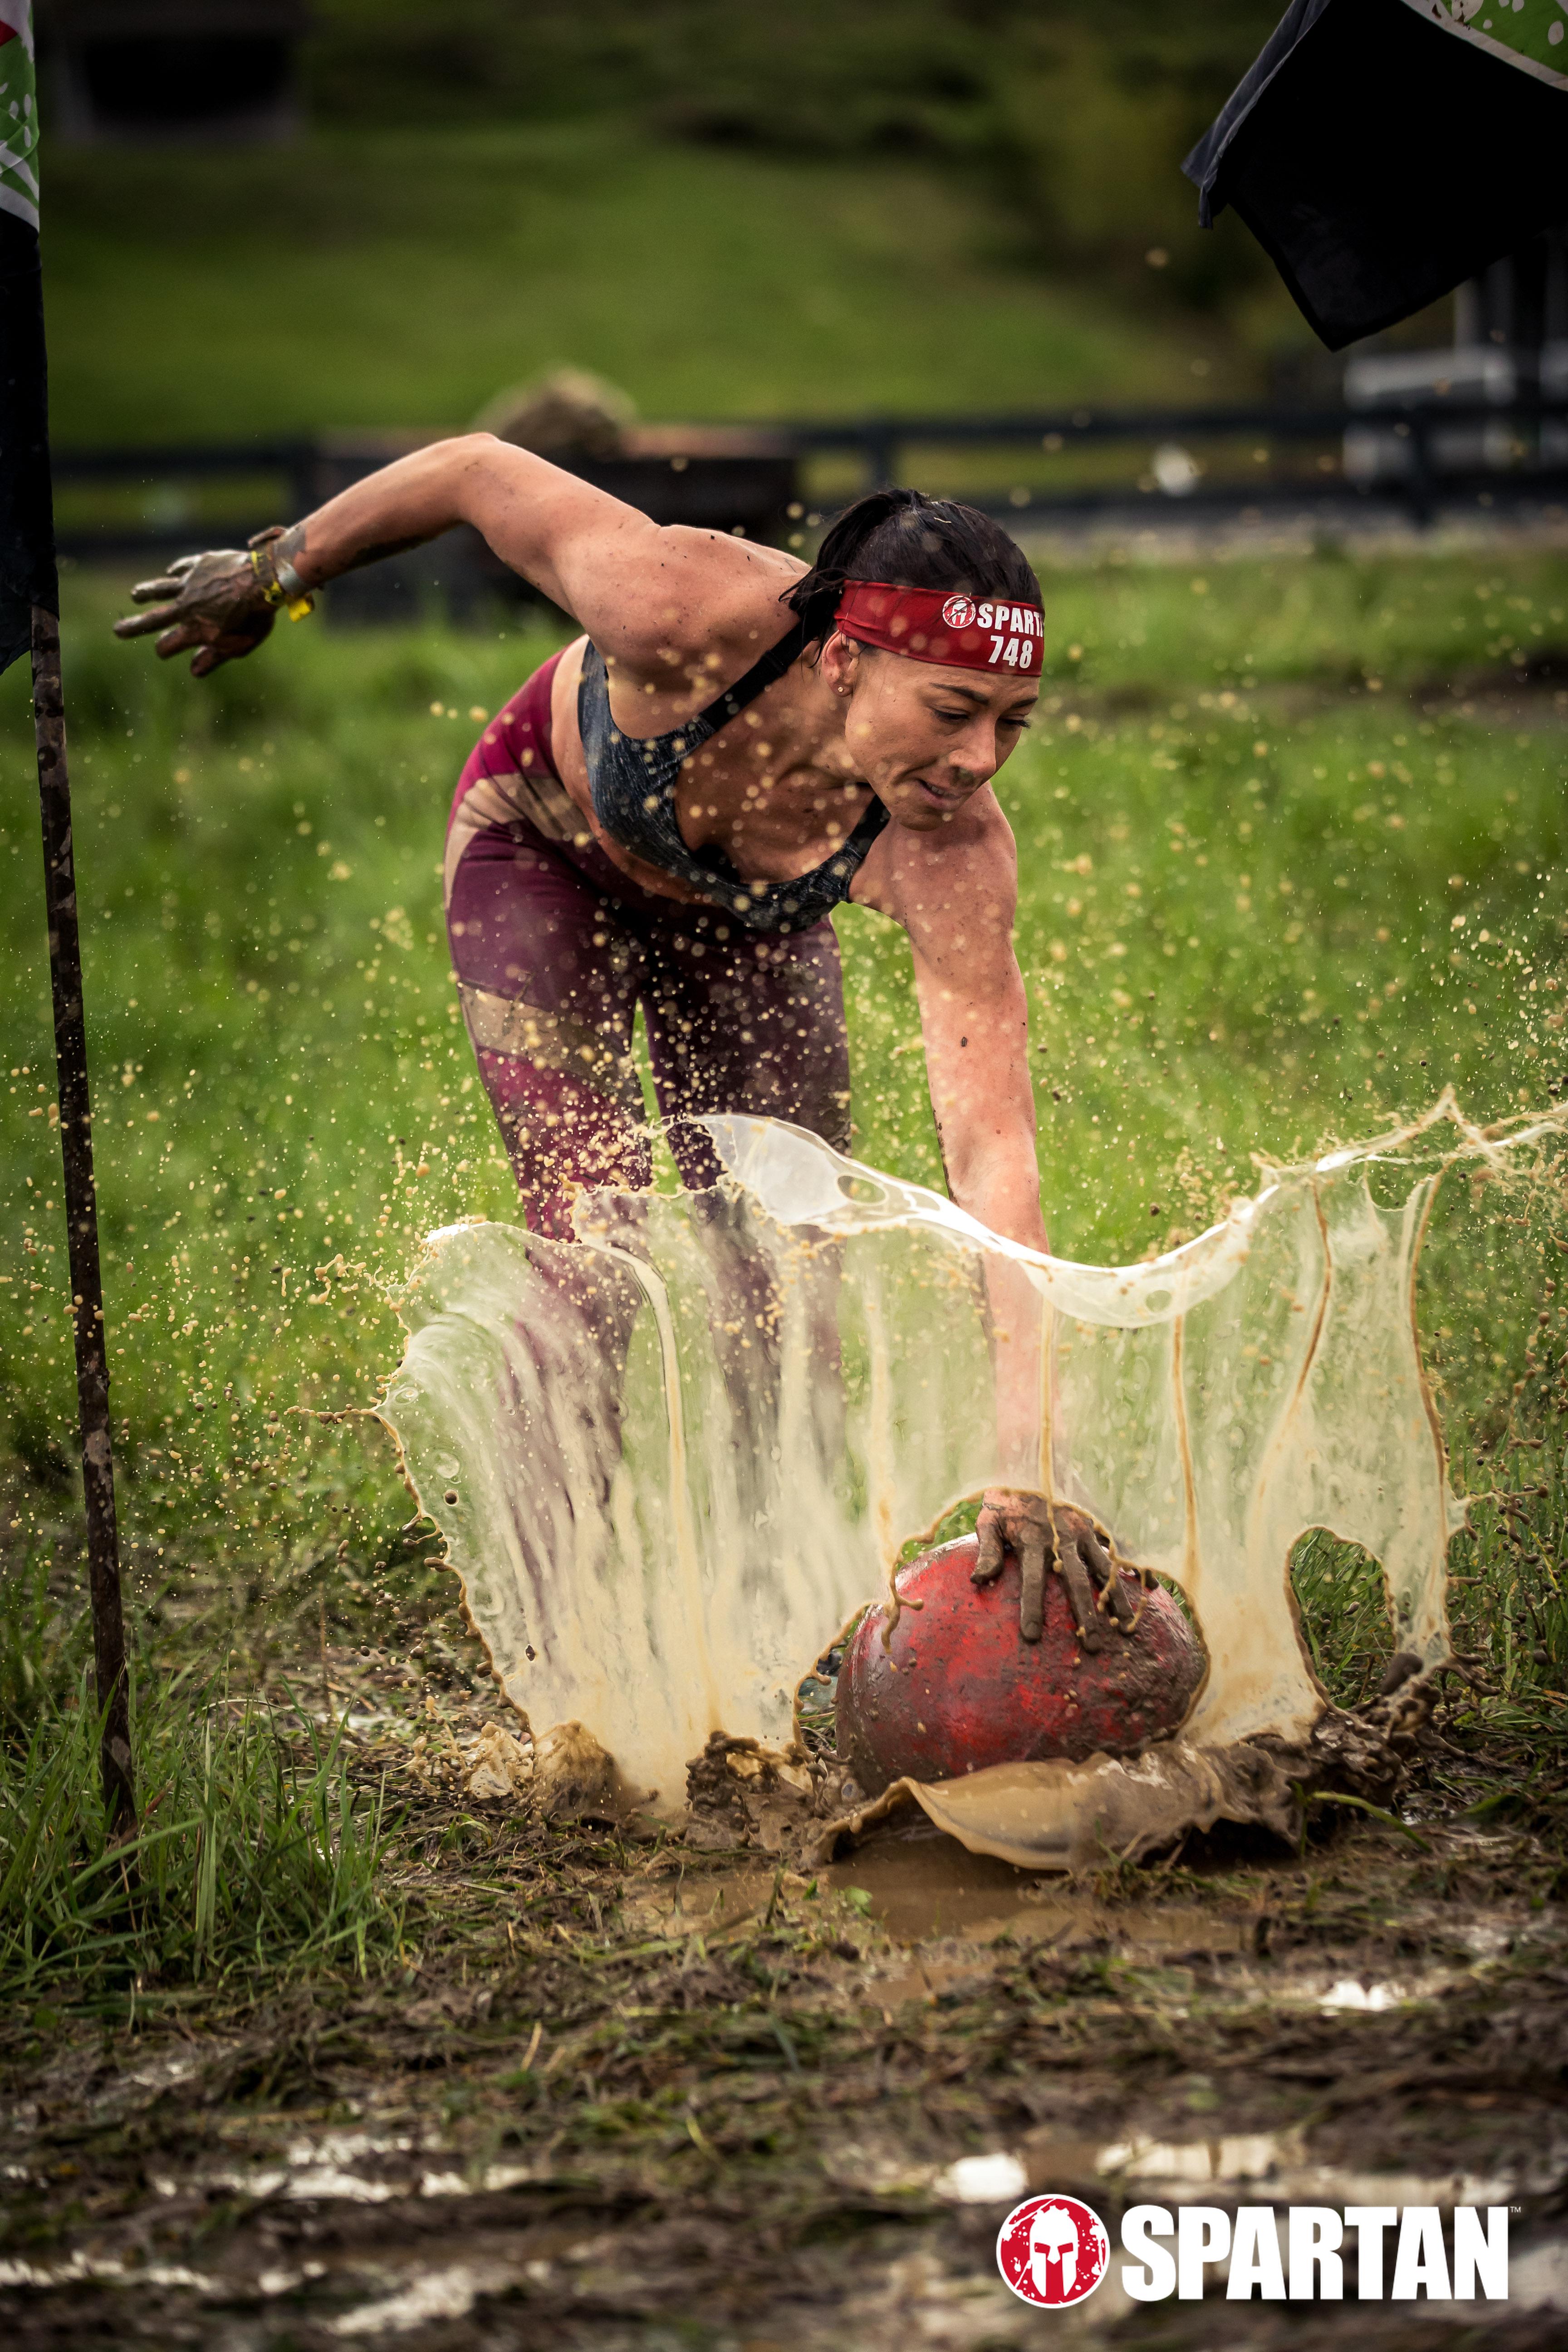 Bad Ass Women of OCR - Tina Talley | Mud Run, OCR, Obstacle Course Race